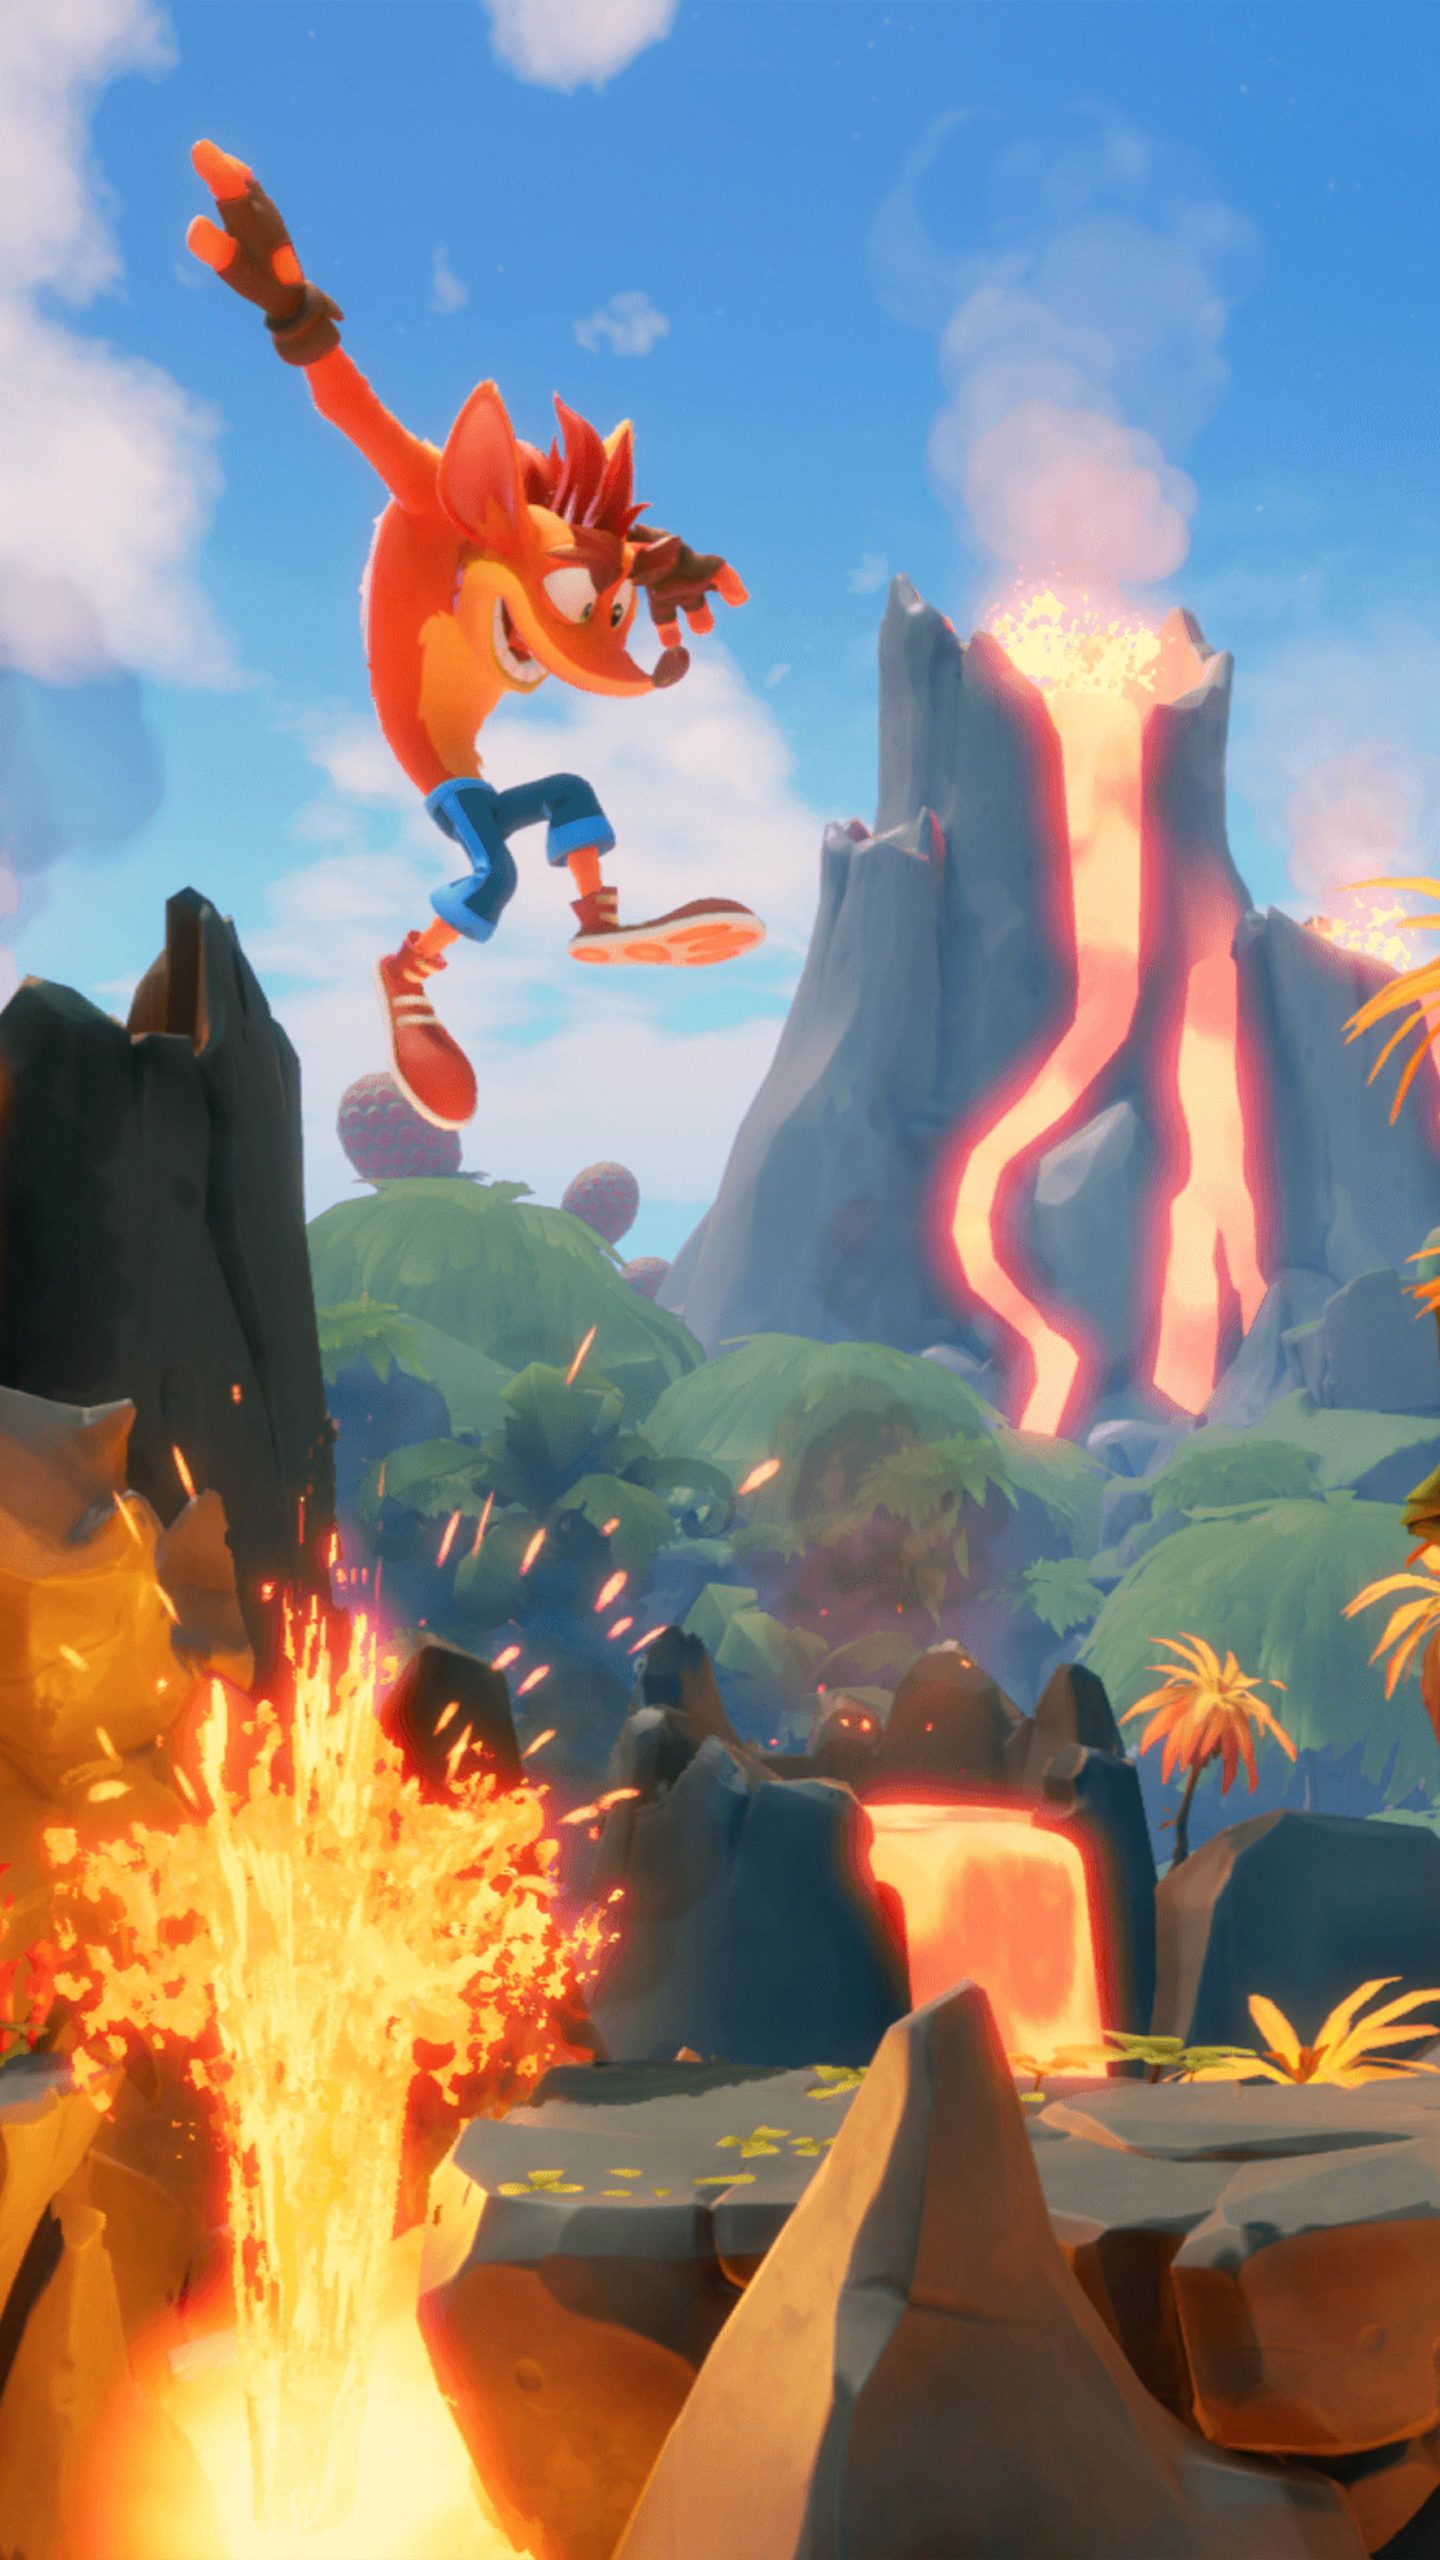 Crash Bandicoot 4 It's About Time Gameplay 4K Ultra HD Mobile Wallpaper